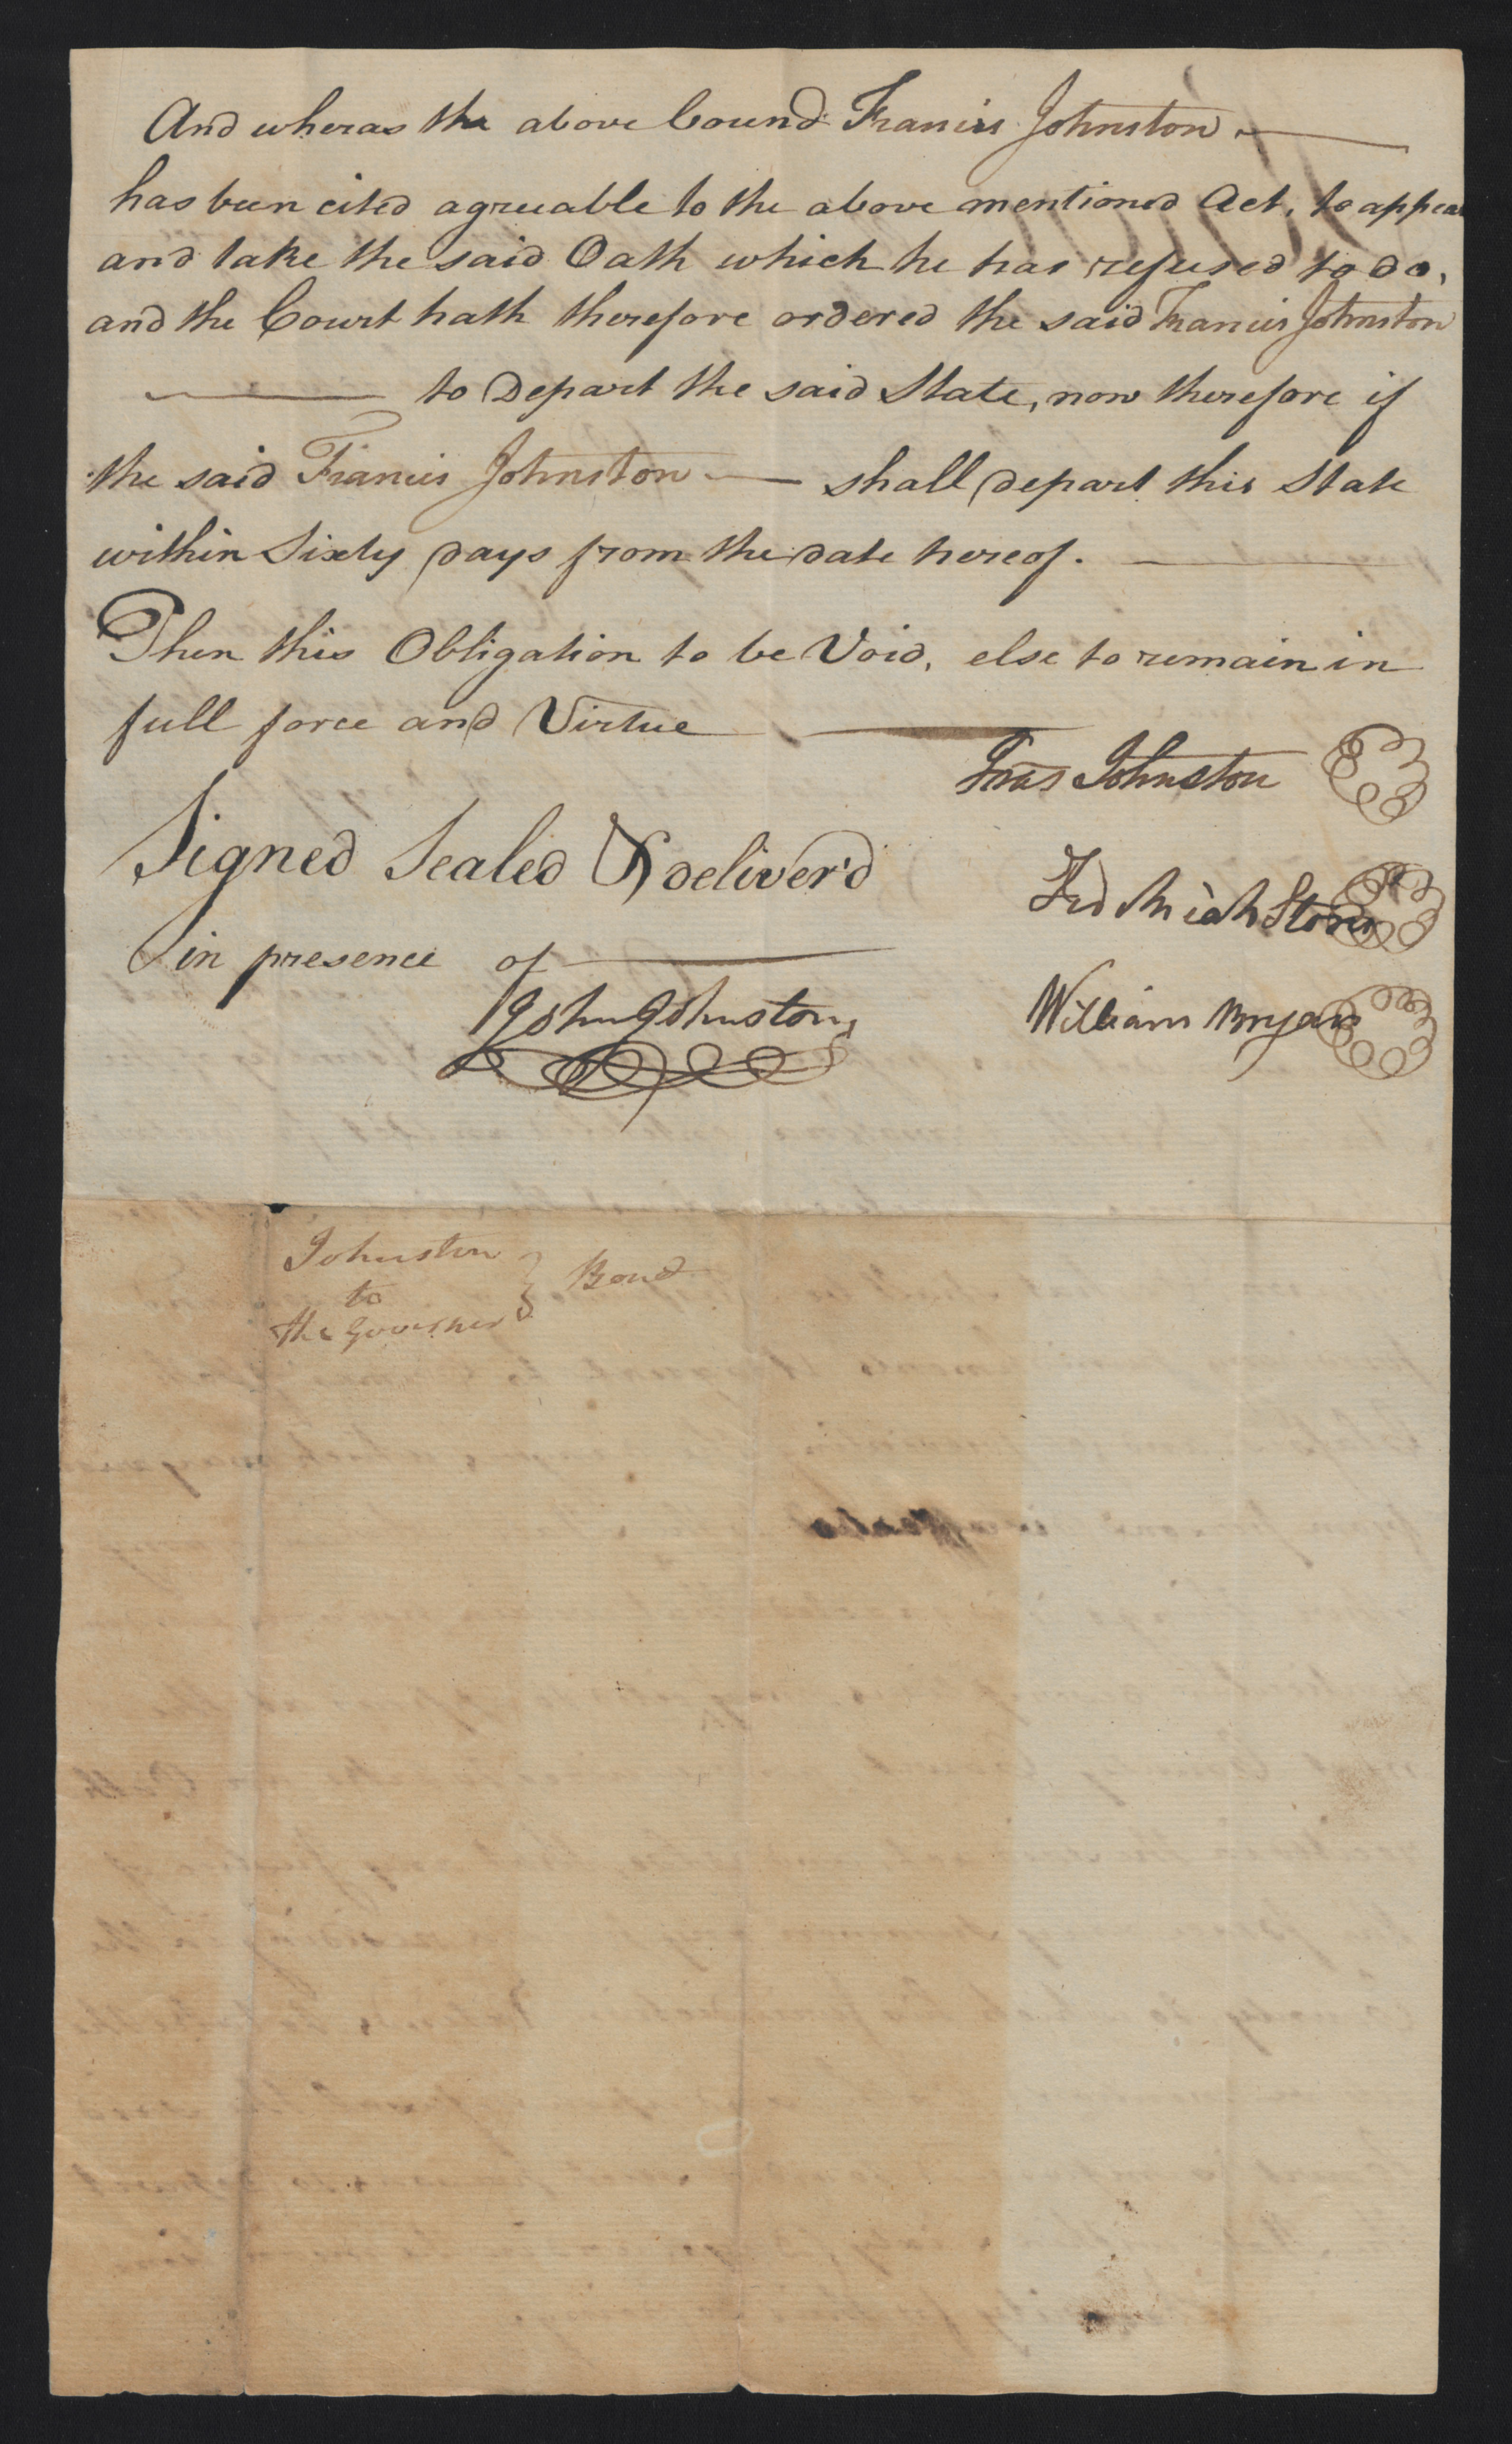 Bond from the Bertie County Court for Francis Johnston to leave North Carolina, 14 August 1777, page 2